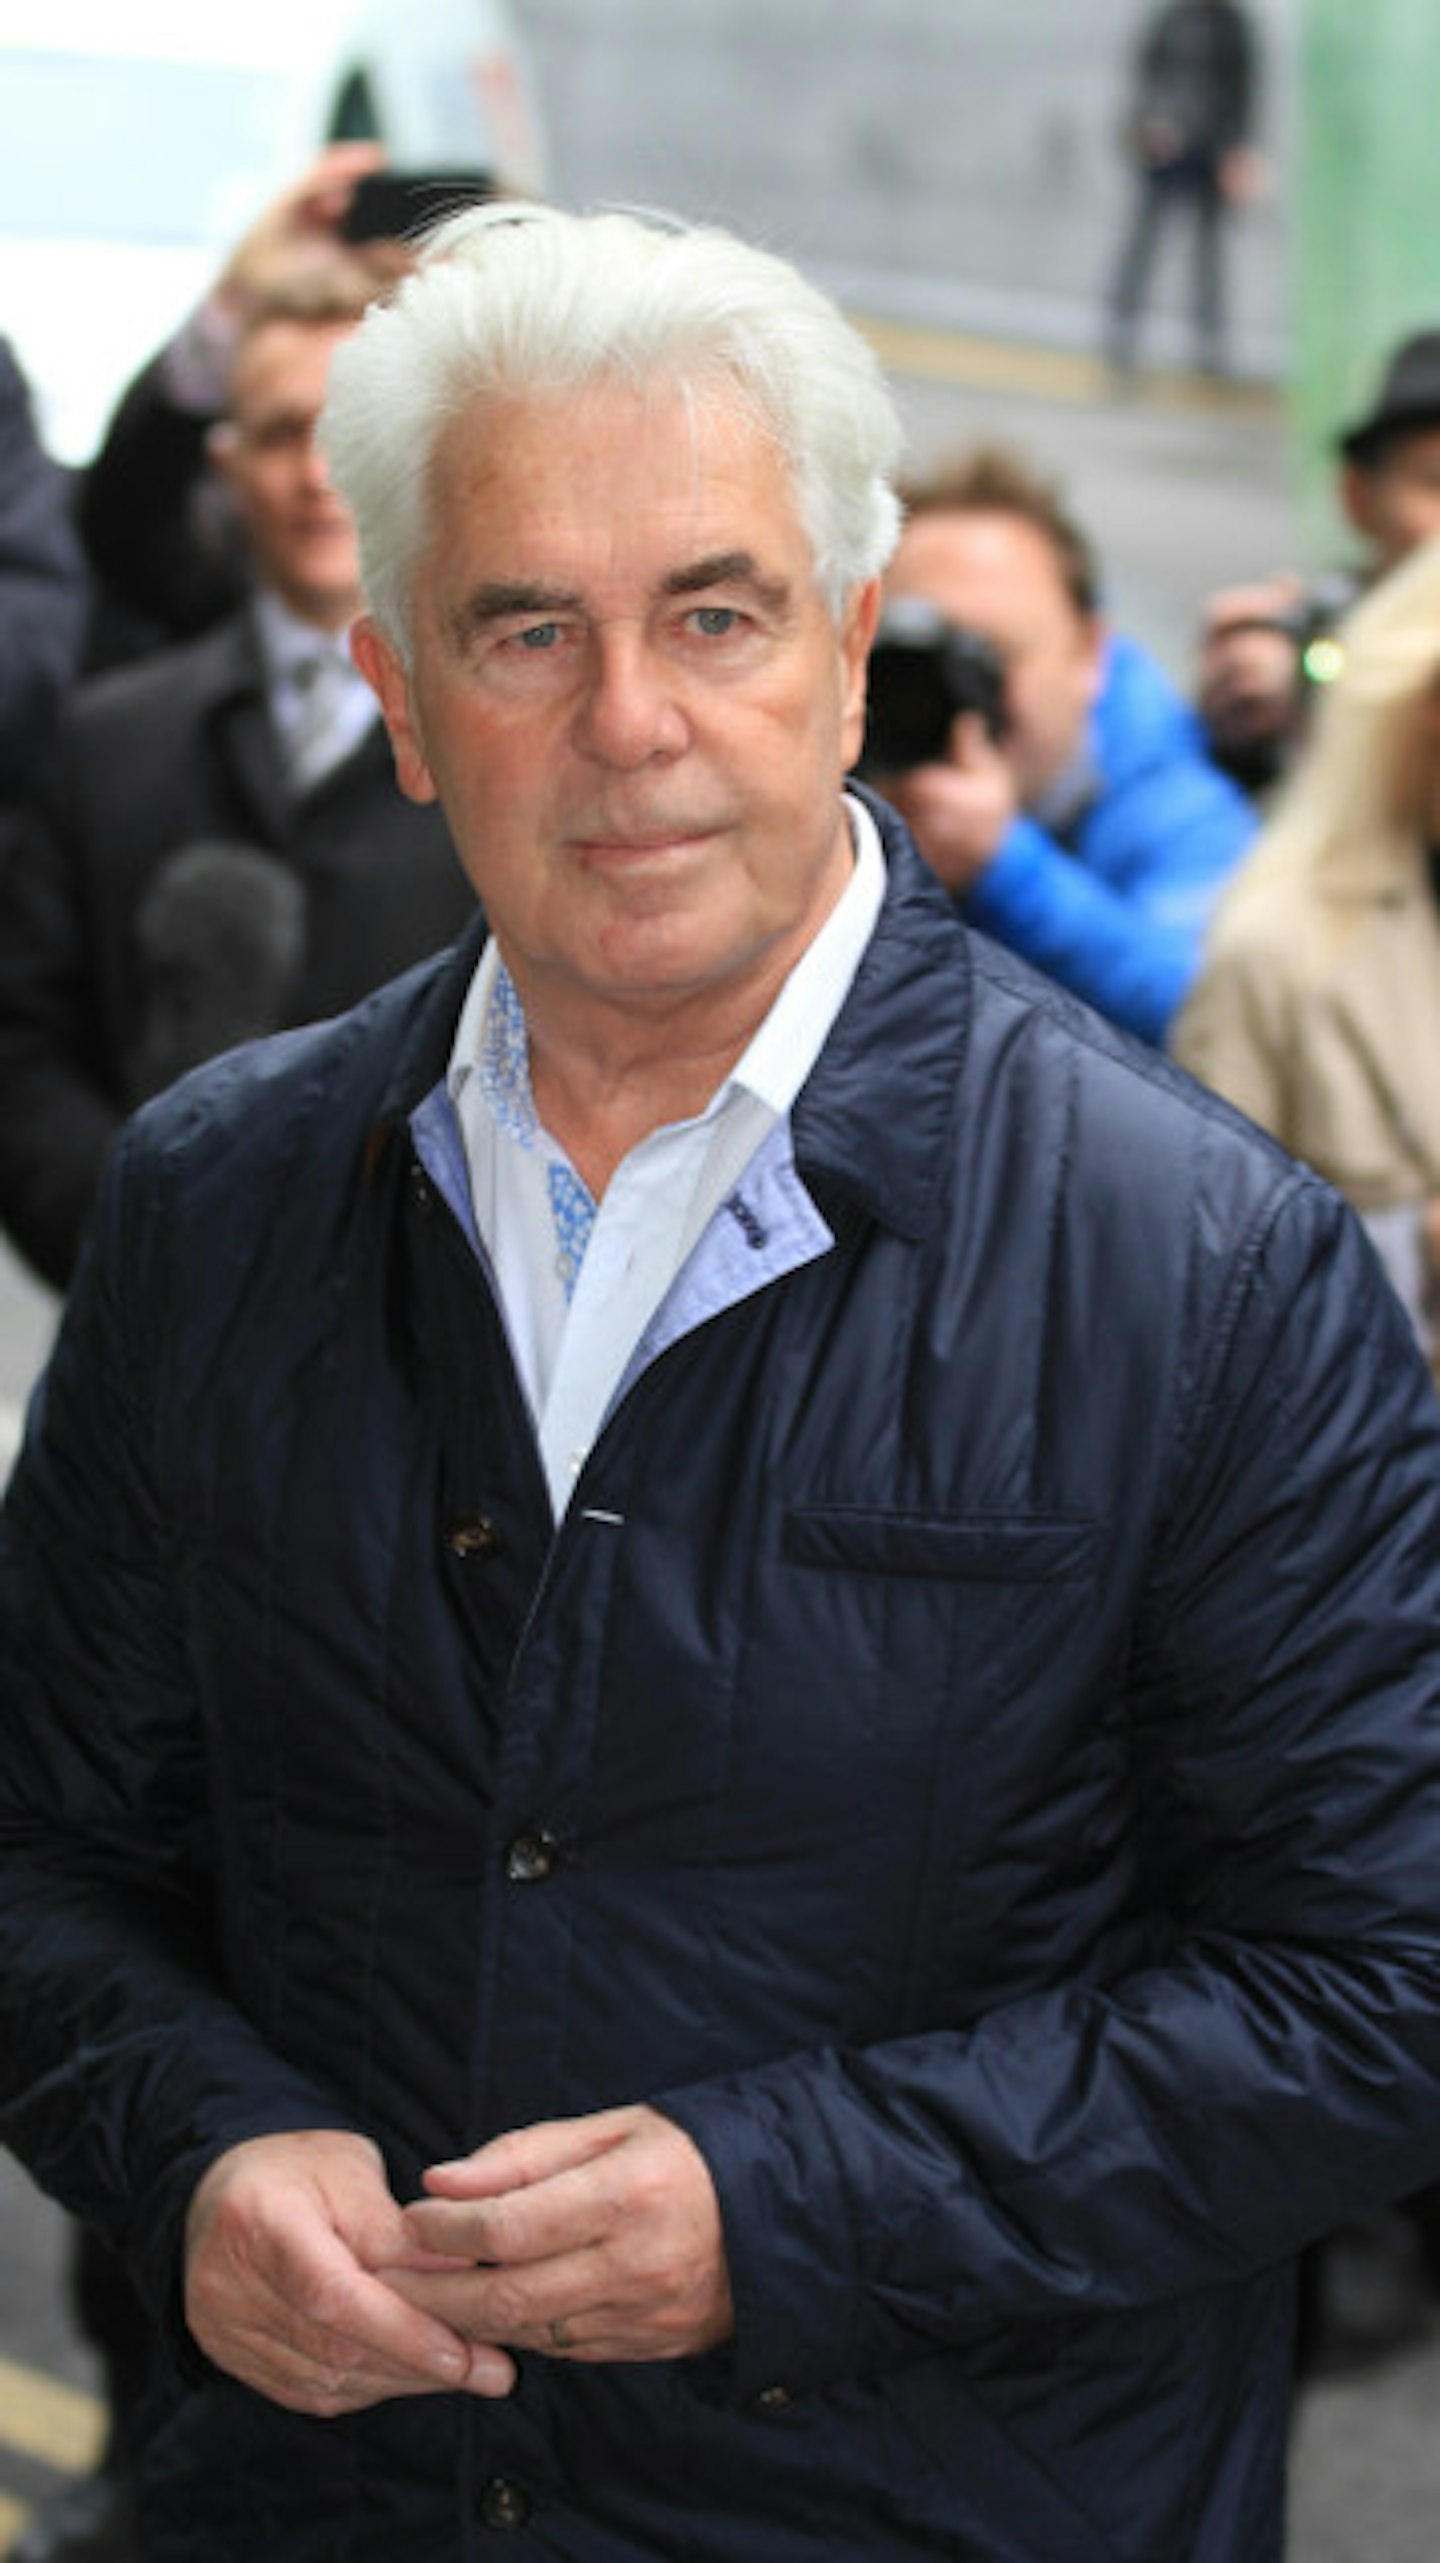 Max Clifford is appealing against his sentence